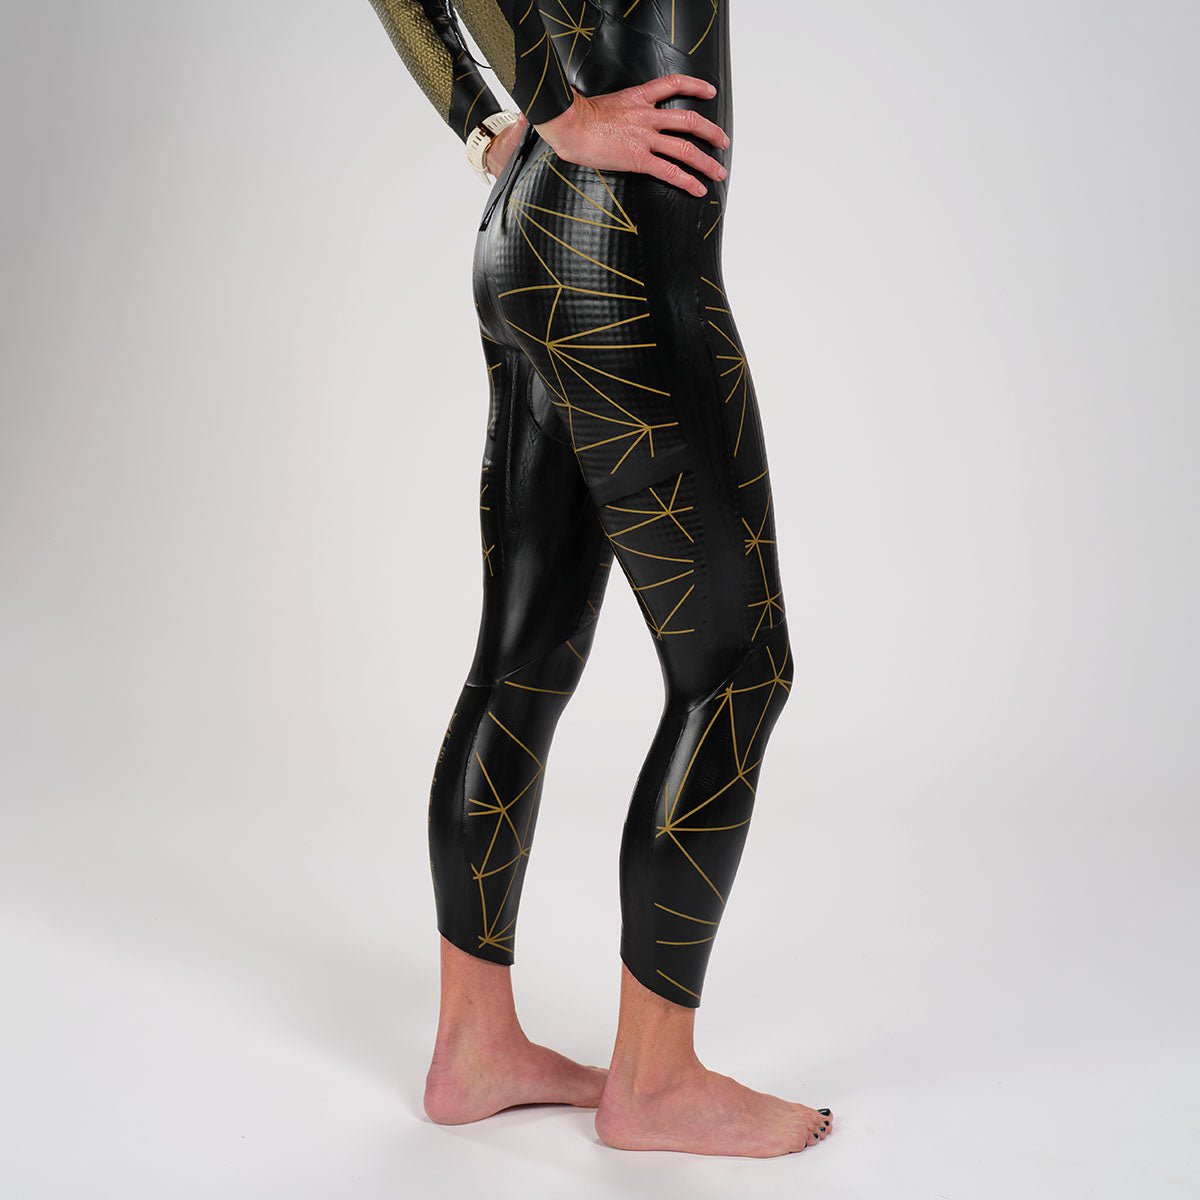 Zoot Sports WETSUITS Women's Wikiwiki 3.0 Wetsuit - Gold